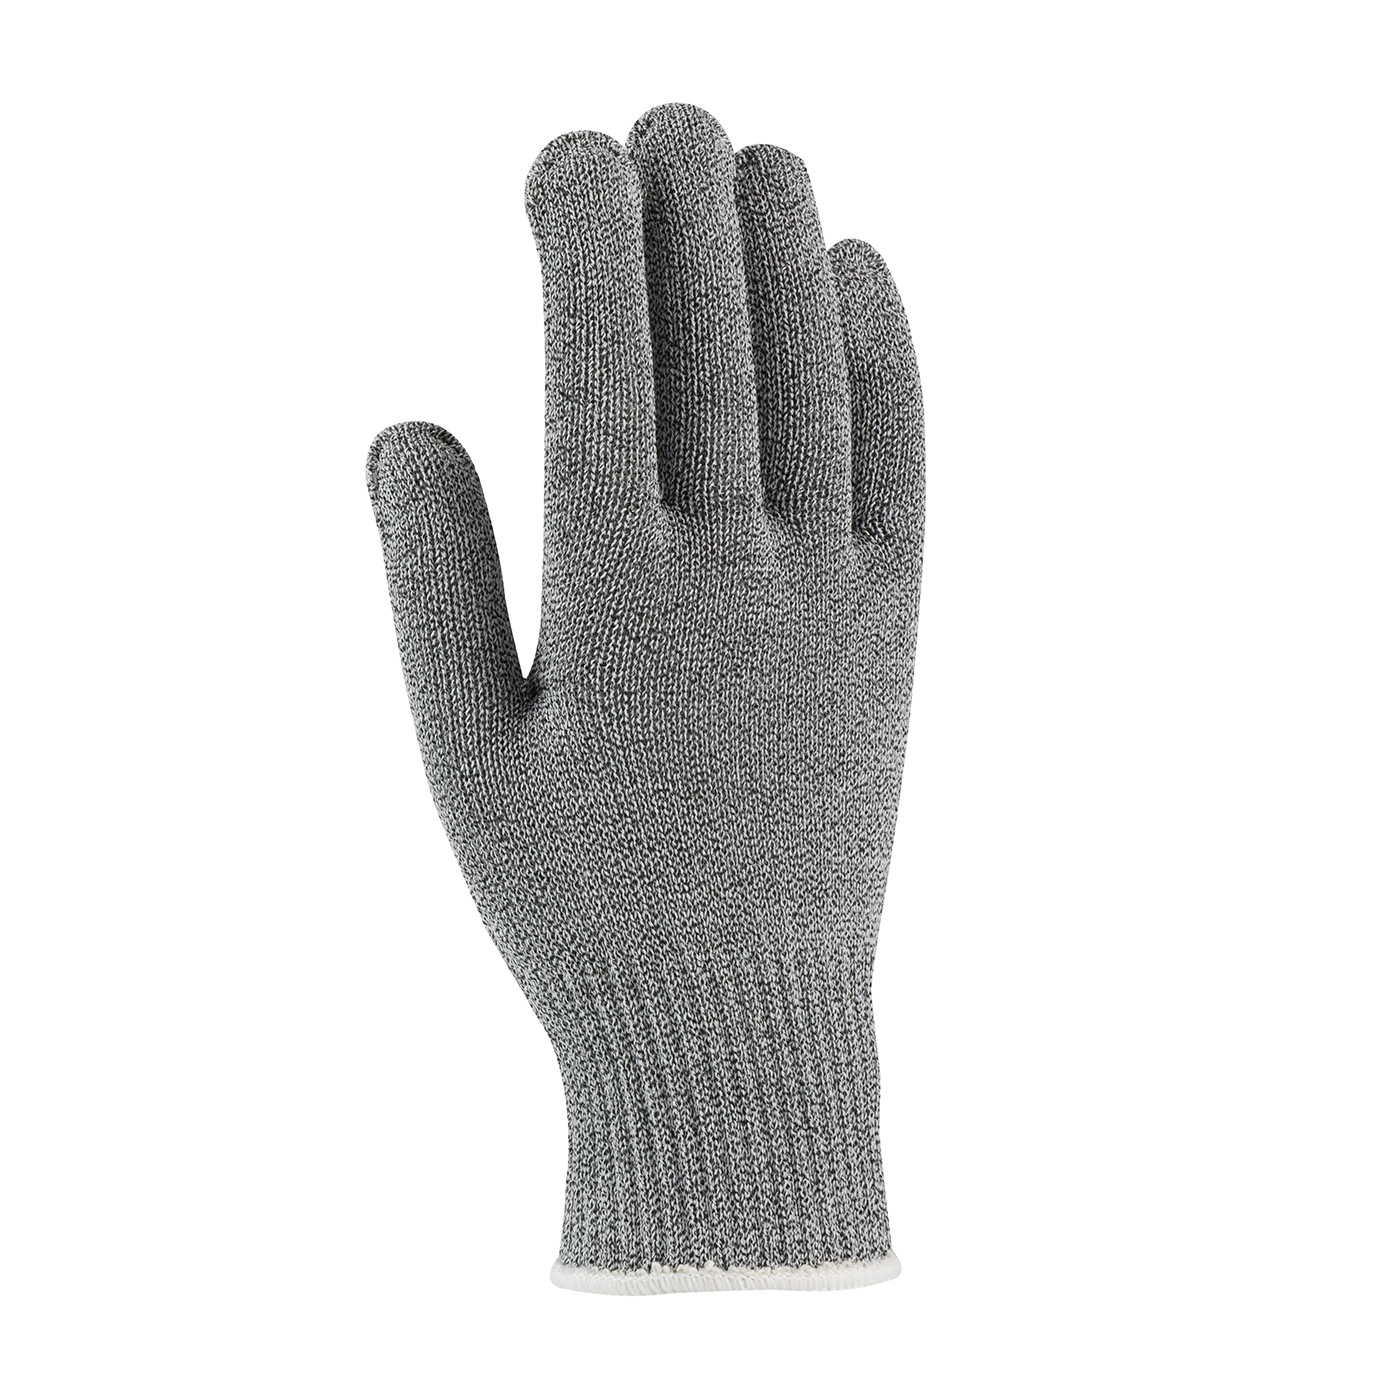 22-760G PIP® gray Claw Cover® Seamless Knit Dyneema® Blended Antimicrobial Glove -- Medium Weight